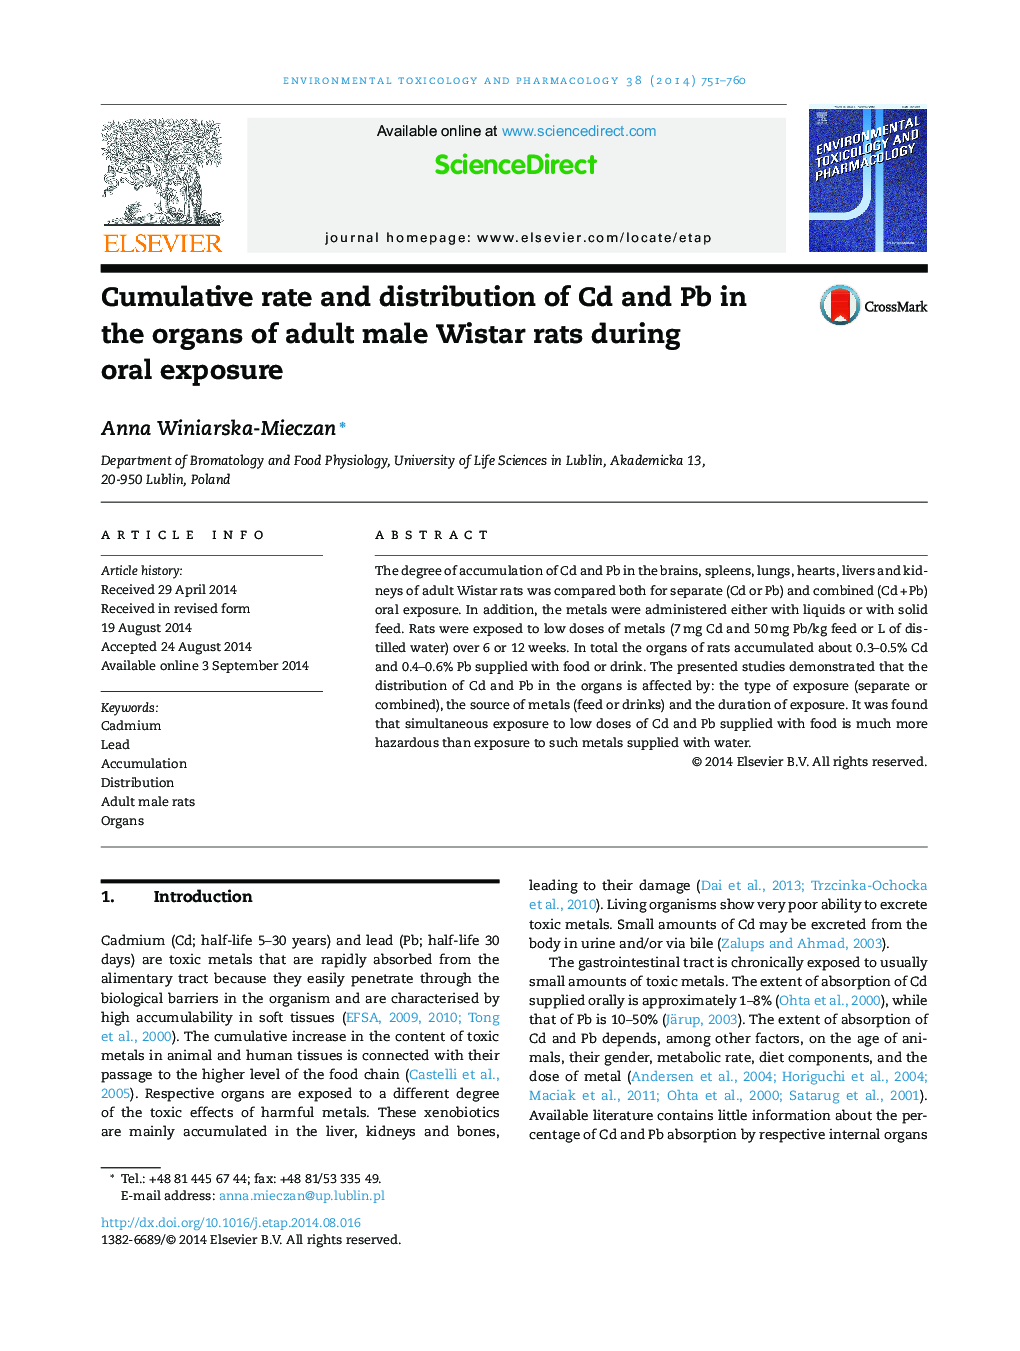 Cumulative rate and distribution of Cd and Pb in the organs of adult male Wistar rats during oral exposure